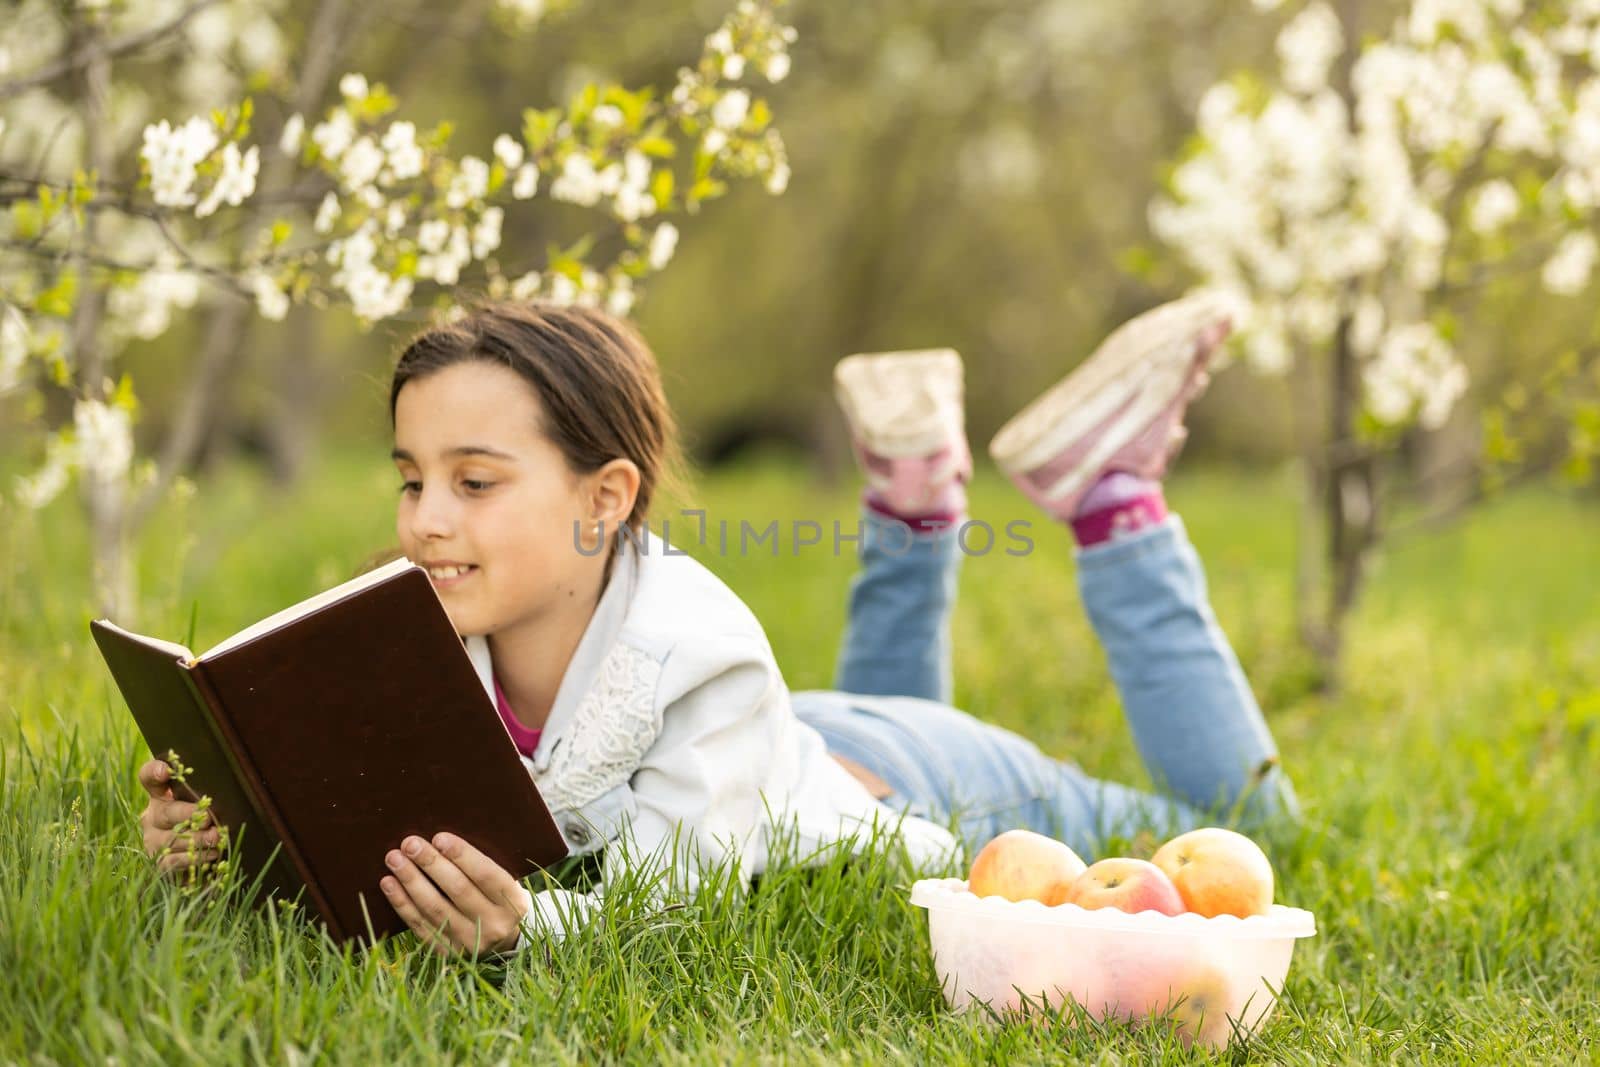 little girl with a bible in the garden, praying, dreaming outdoors